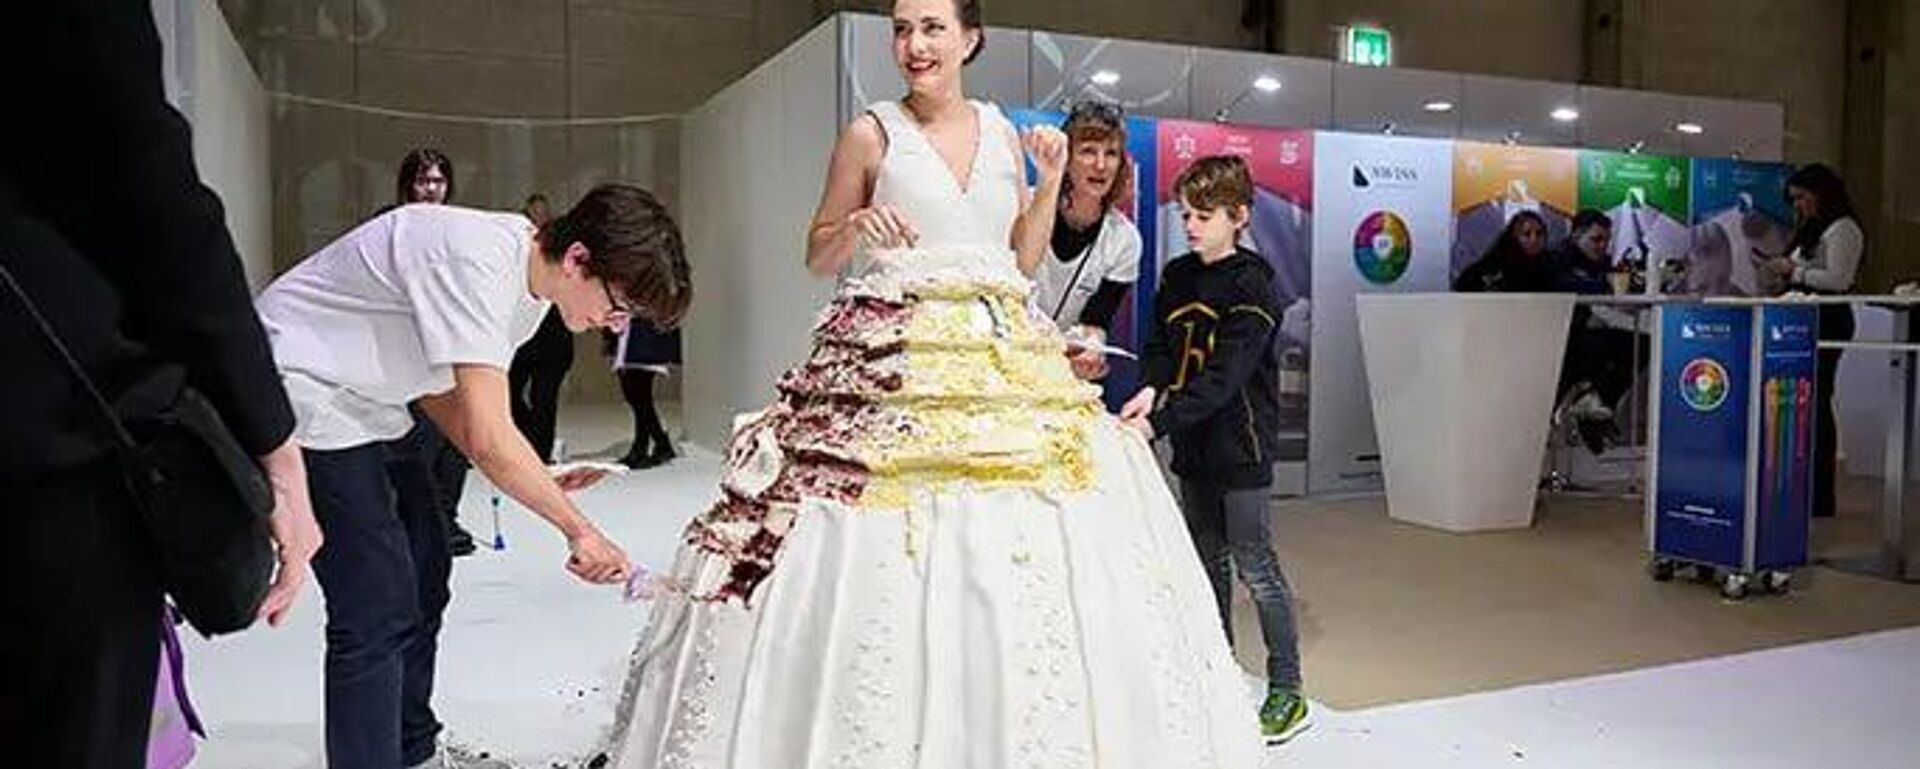 the Largest Wearable Cake Dress (Supported) Weighing 131 kg - Sputnik India, 1920, 02.02.2023